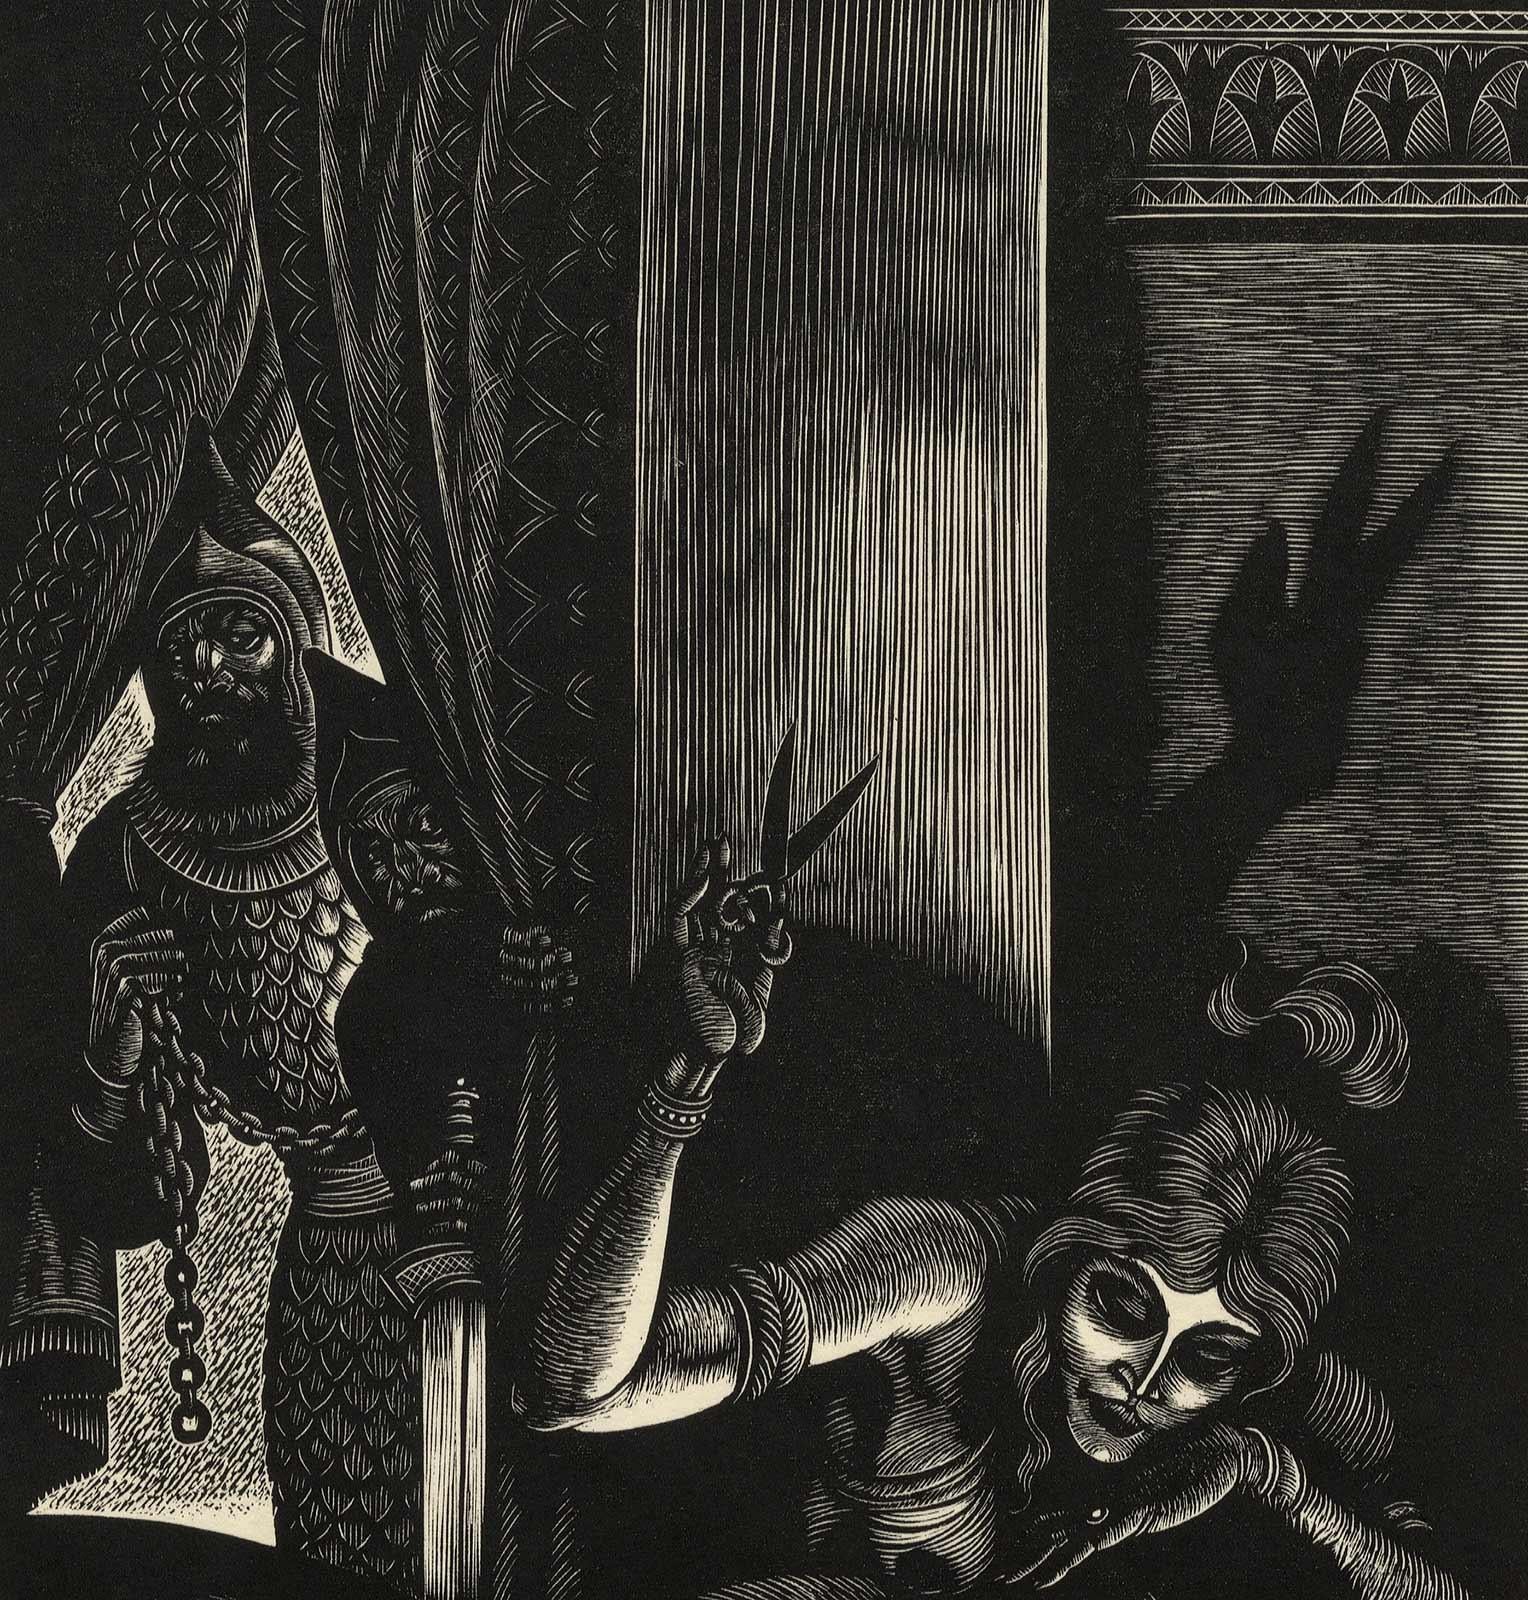 And His Strength Went From Him (Samson And Delilah) - Print by Fritz Eichenberg.